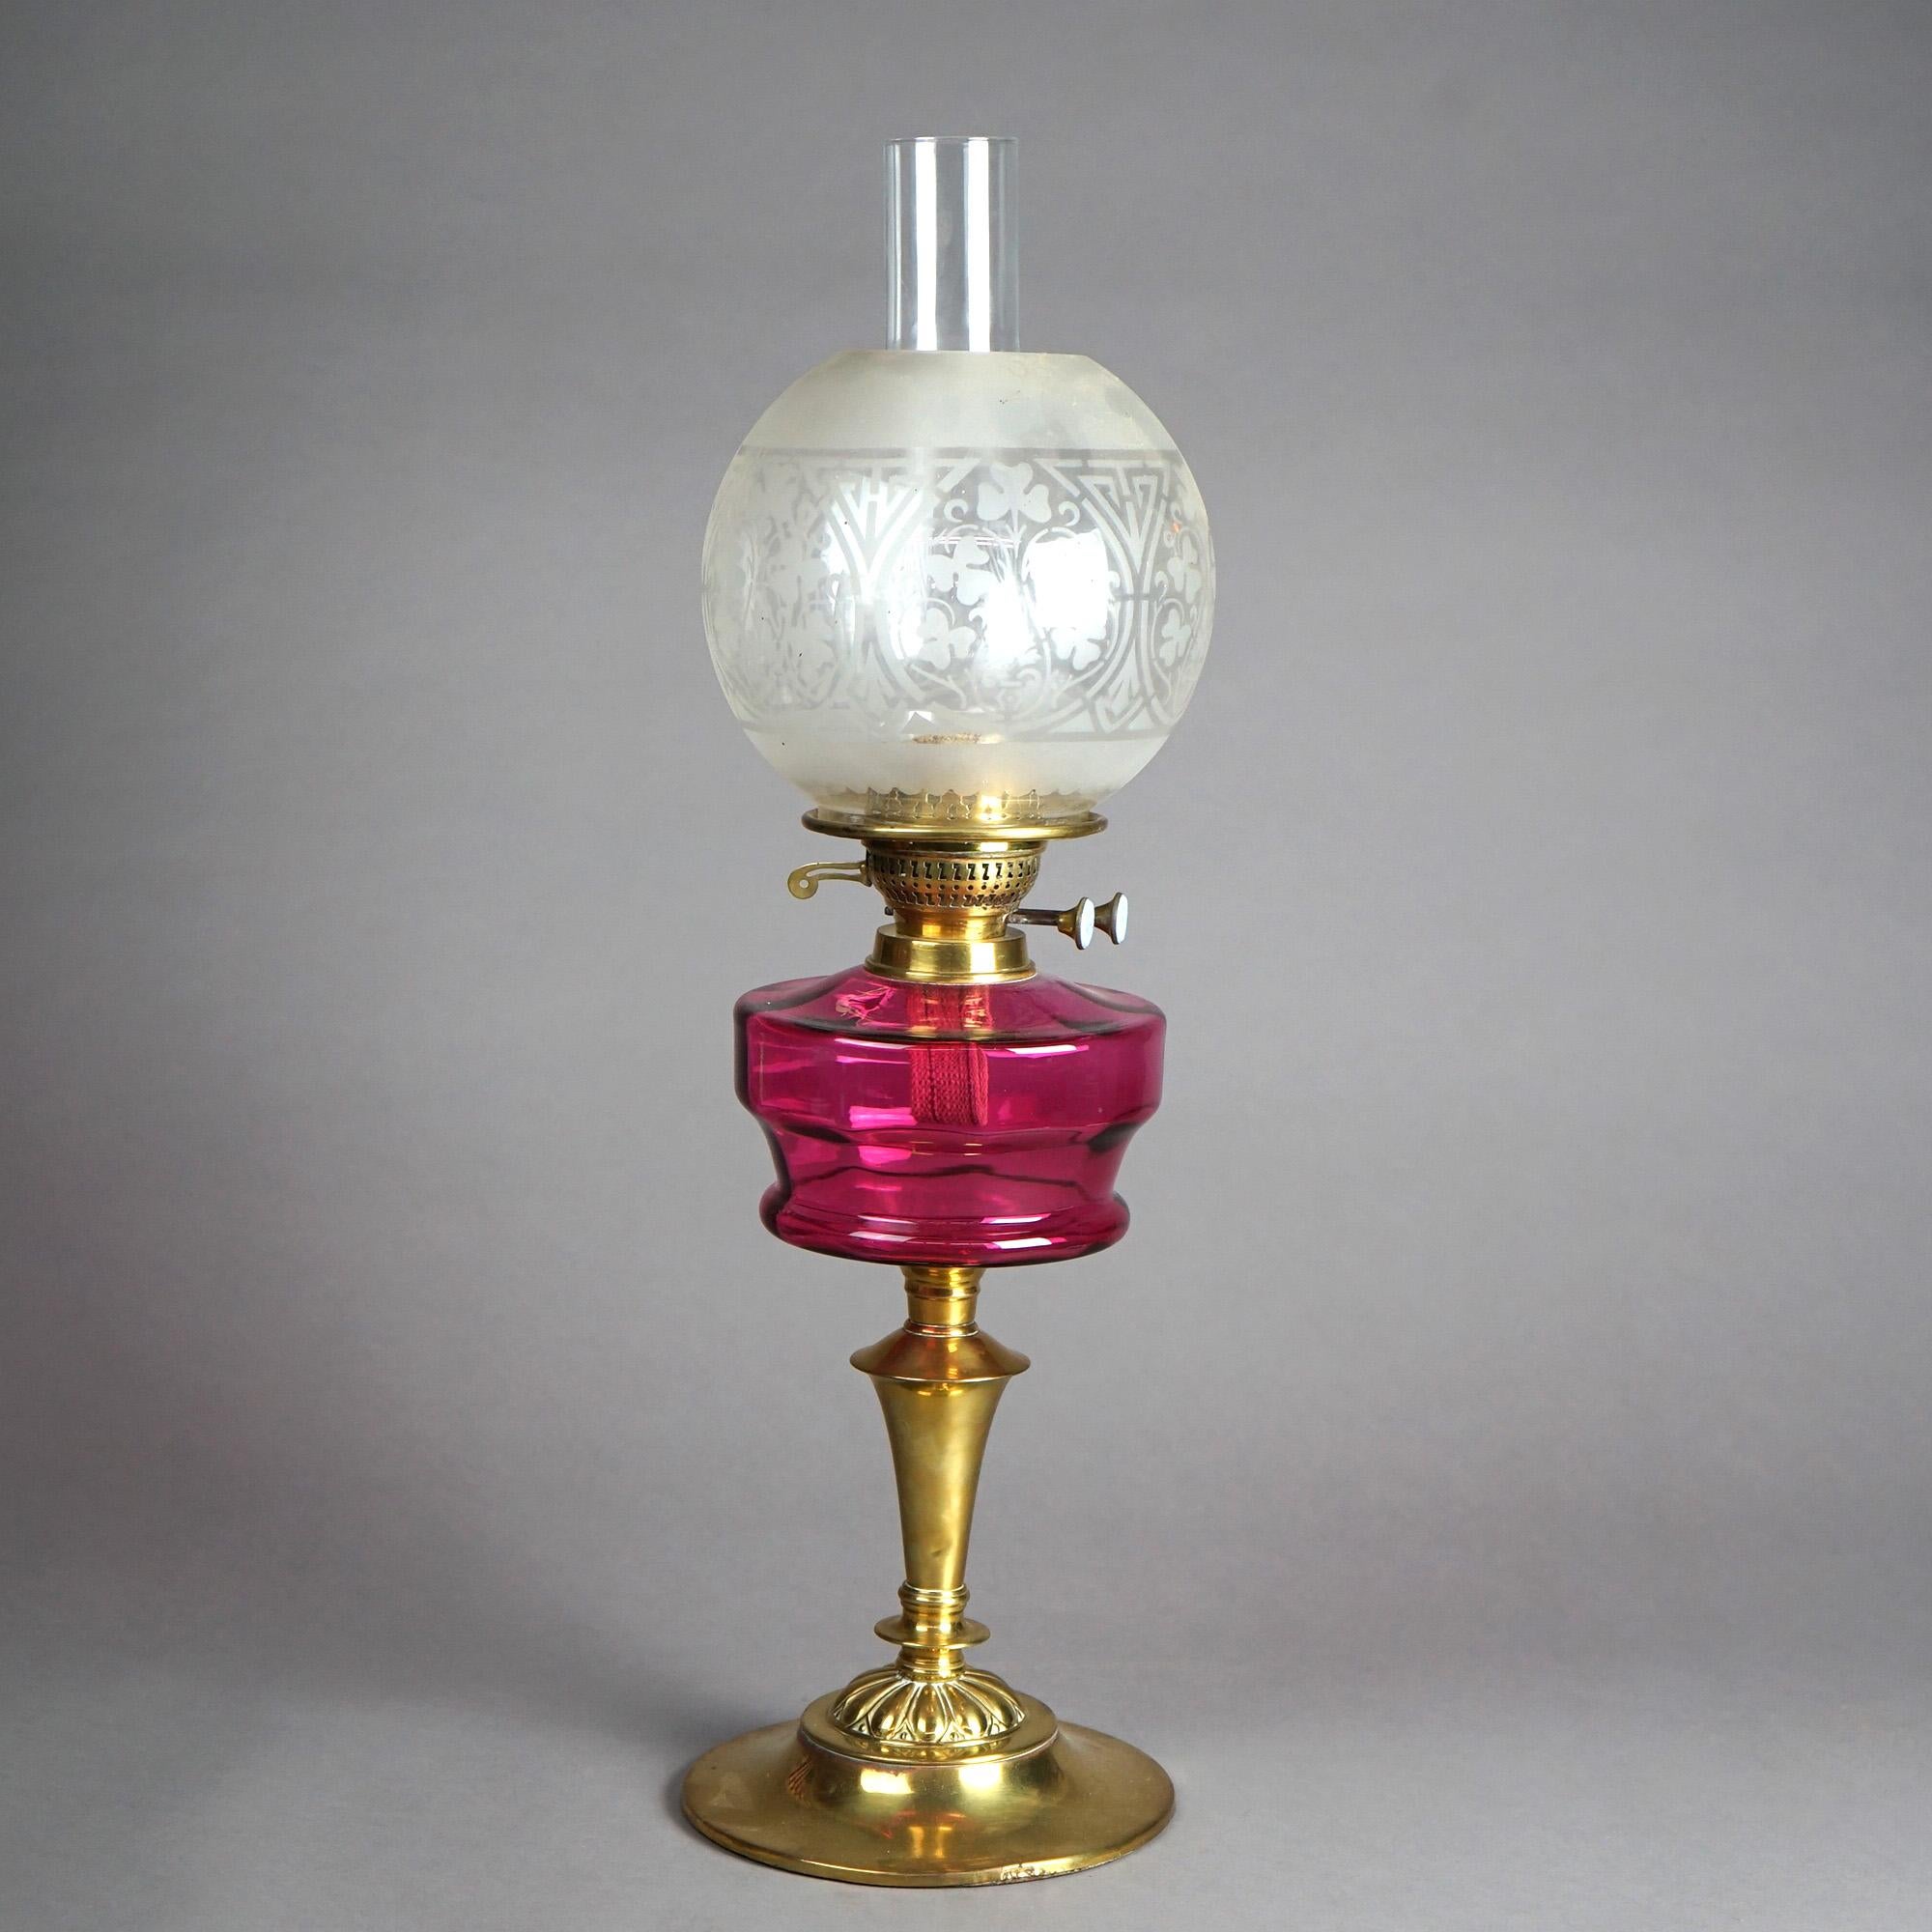 Antique Brass &Cranberry Glass “Gone With The Wind” Oil Lamp C1890 In Good Condition For Sale In Big Flats, NY